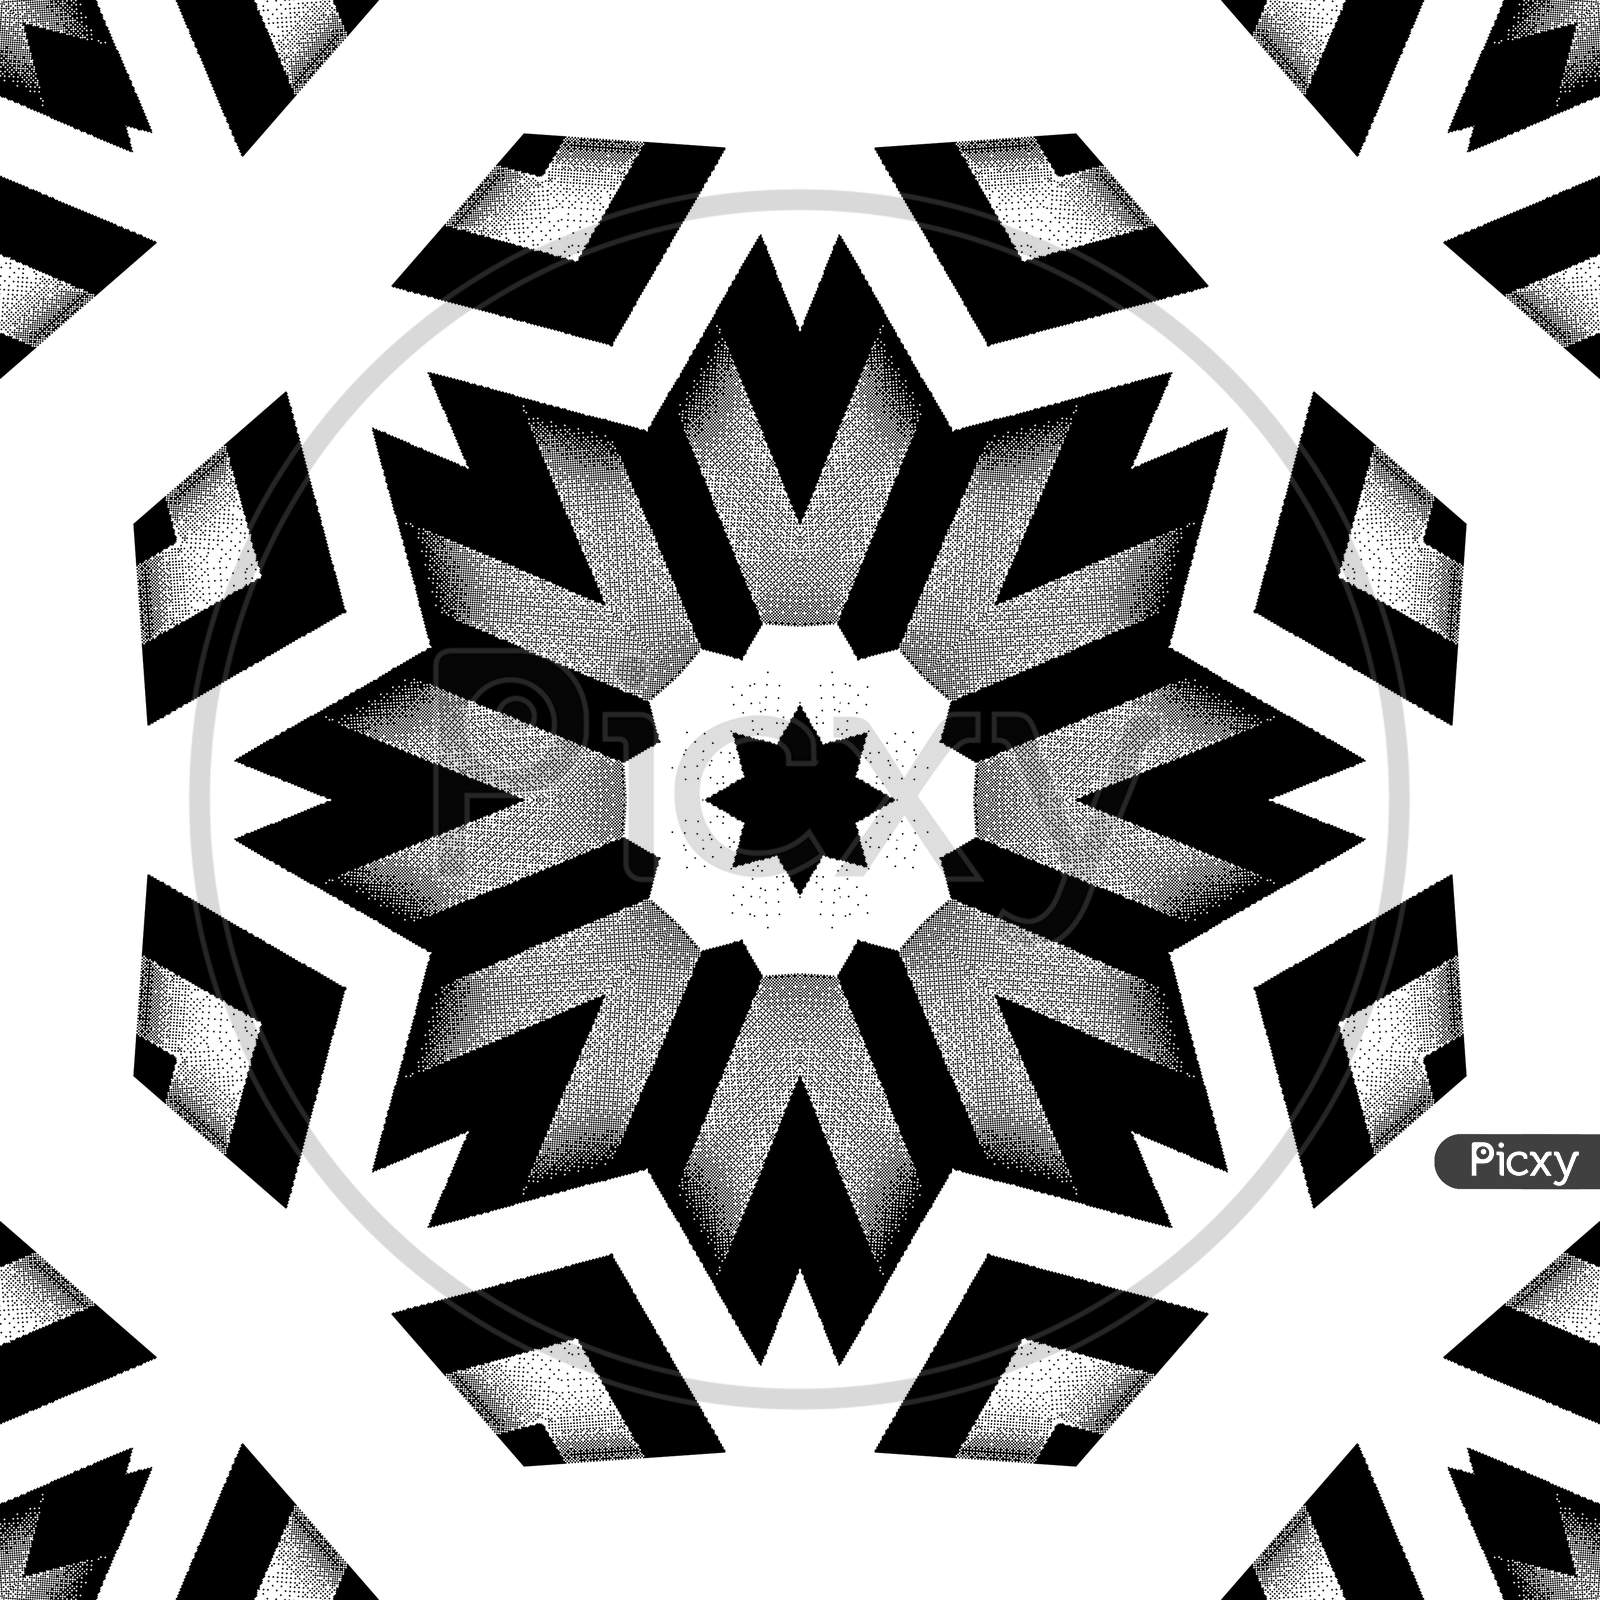 Beautiful And Elegant Monochromatic Symmetrical Mandala Designs On Solid Sheet Of Wallpaper. Concept Of Home Decor And Interior Designing